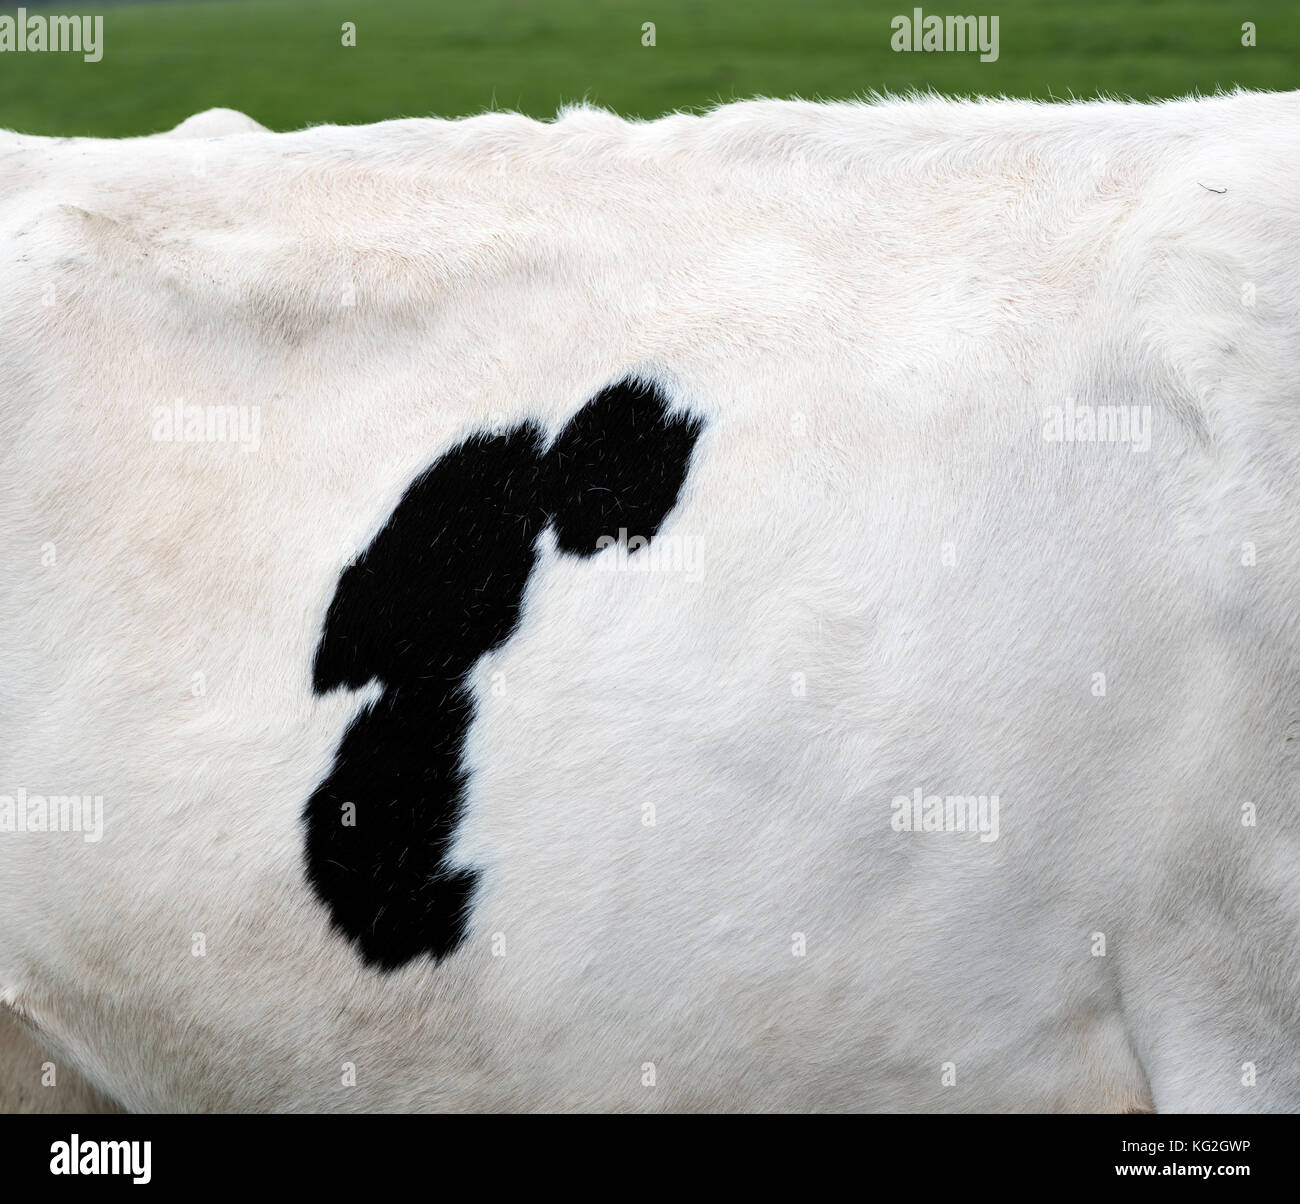 black spot on hide of white cow Stock Photo